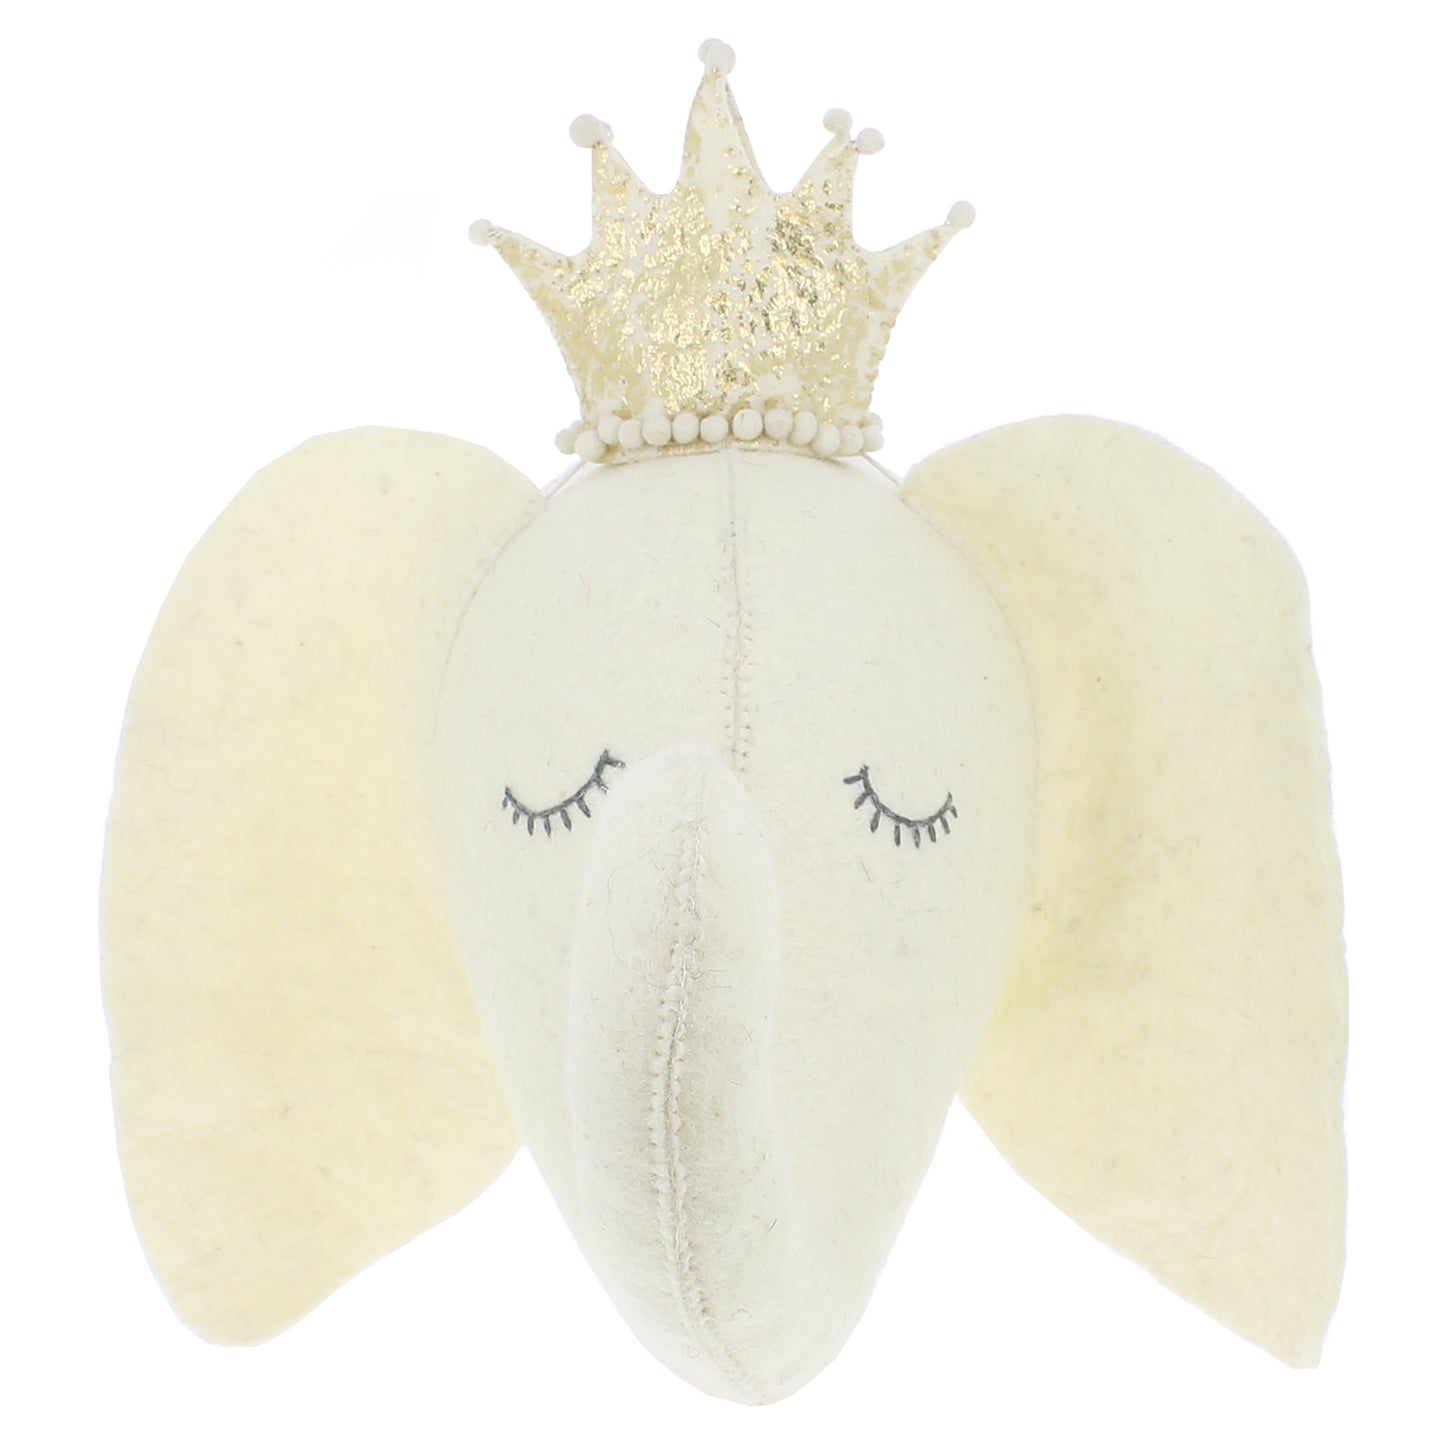 Elephant Head with Sleepy Eyes and Gold Crown - Large